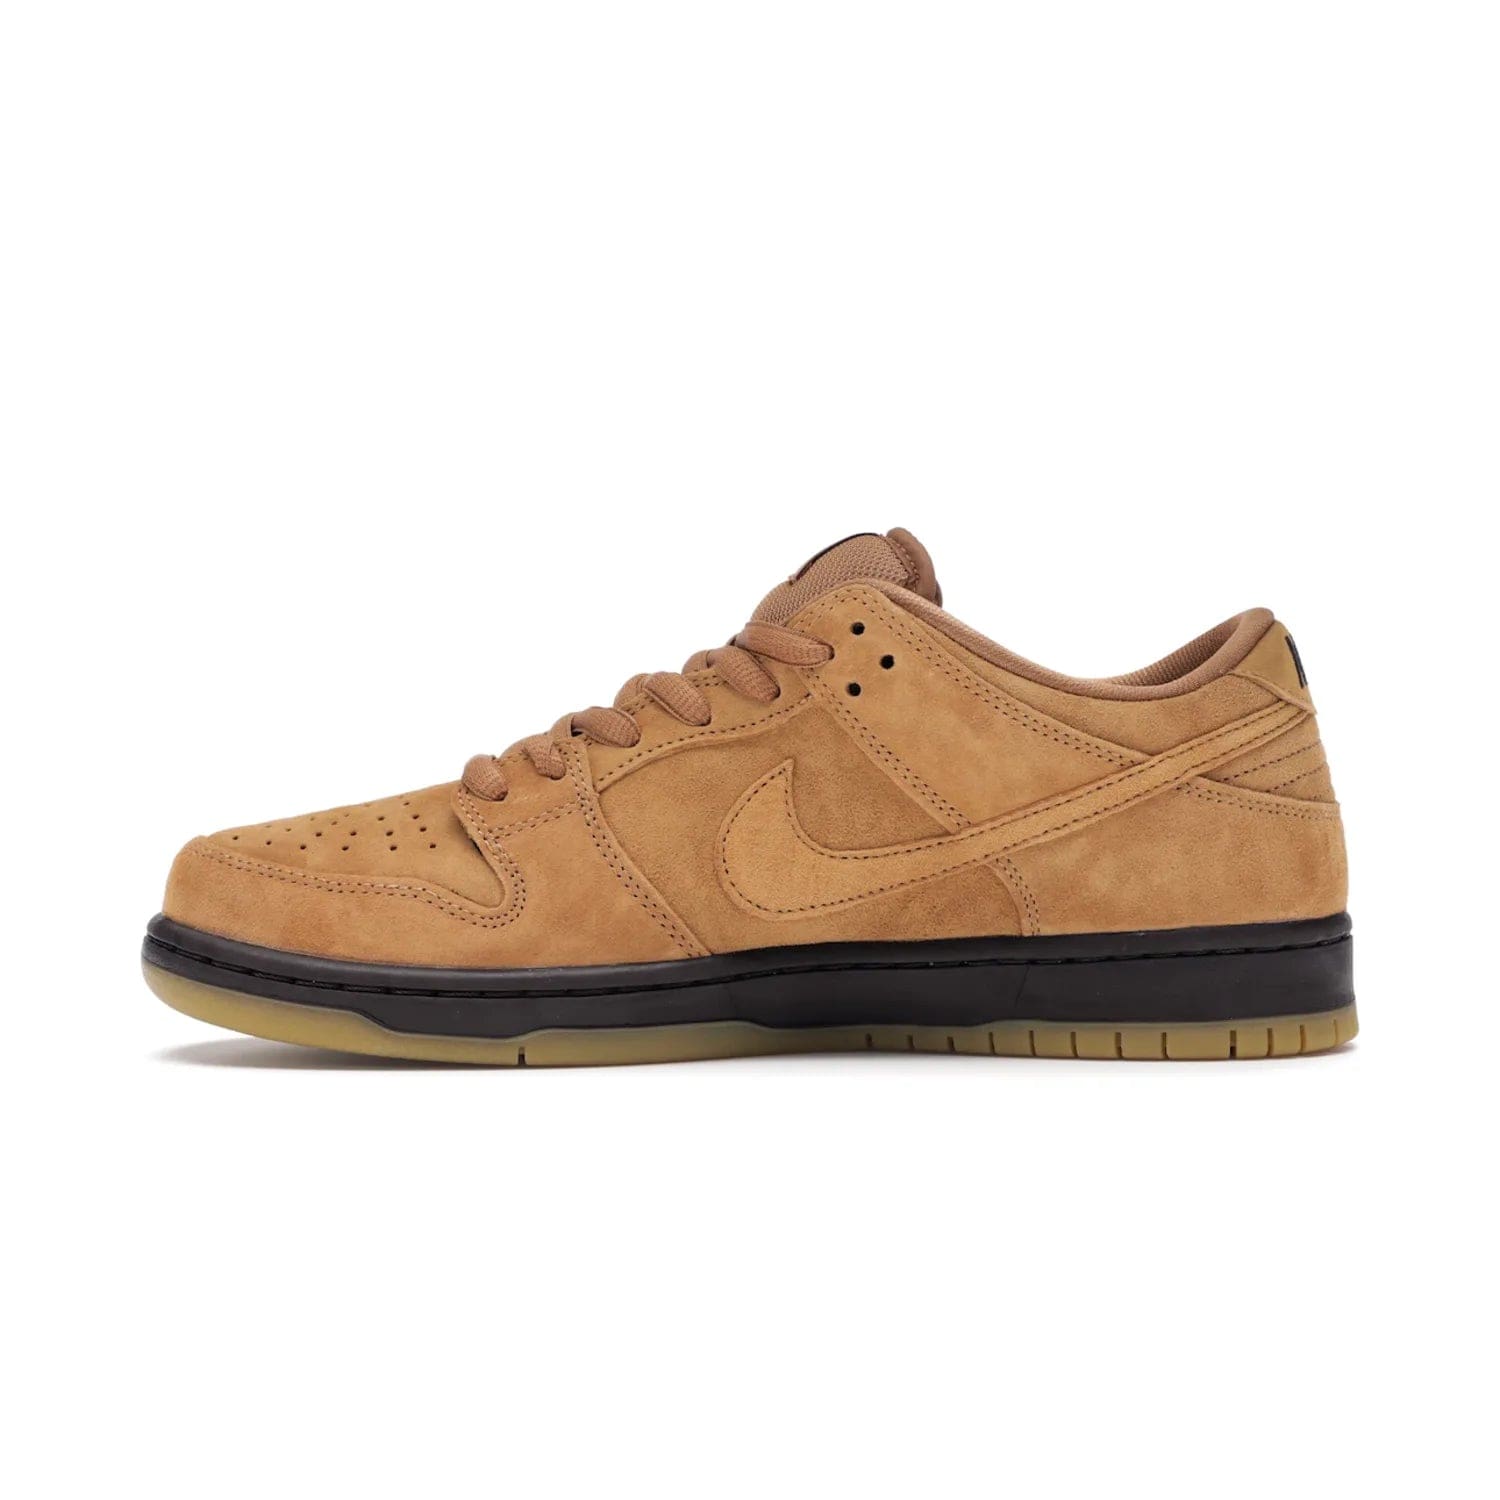 Nike SB Dunk Low Wheat (2021/2023) - Image 19 - Only at www.BallersClubKickz.com - The Nike SB Dunk Low Wheat (2021/2023)has a sleek silhouette and wheat suede upper. Tan tones for lining, mesh tongues, and laces. Iconic color palette midsole, perforated boxing toe. Brown branding on tongue and heel. Gum rubber outsole with partitioned pattern for traction. Eschewed in Feb 2021 for $110.